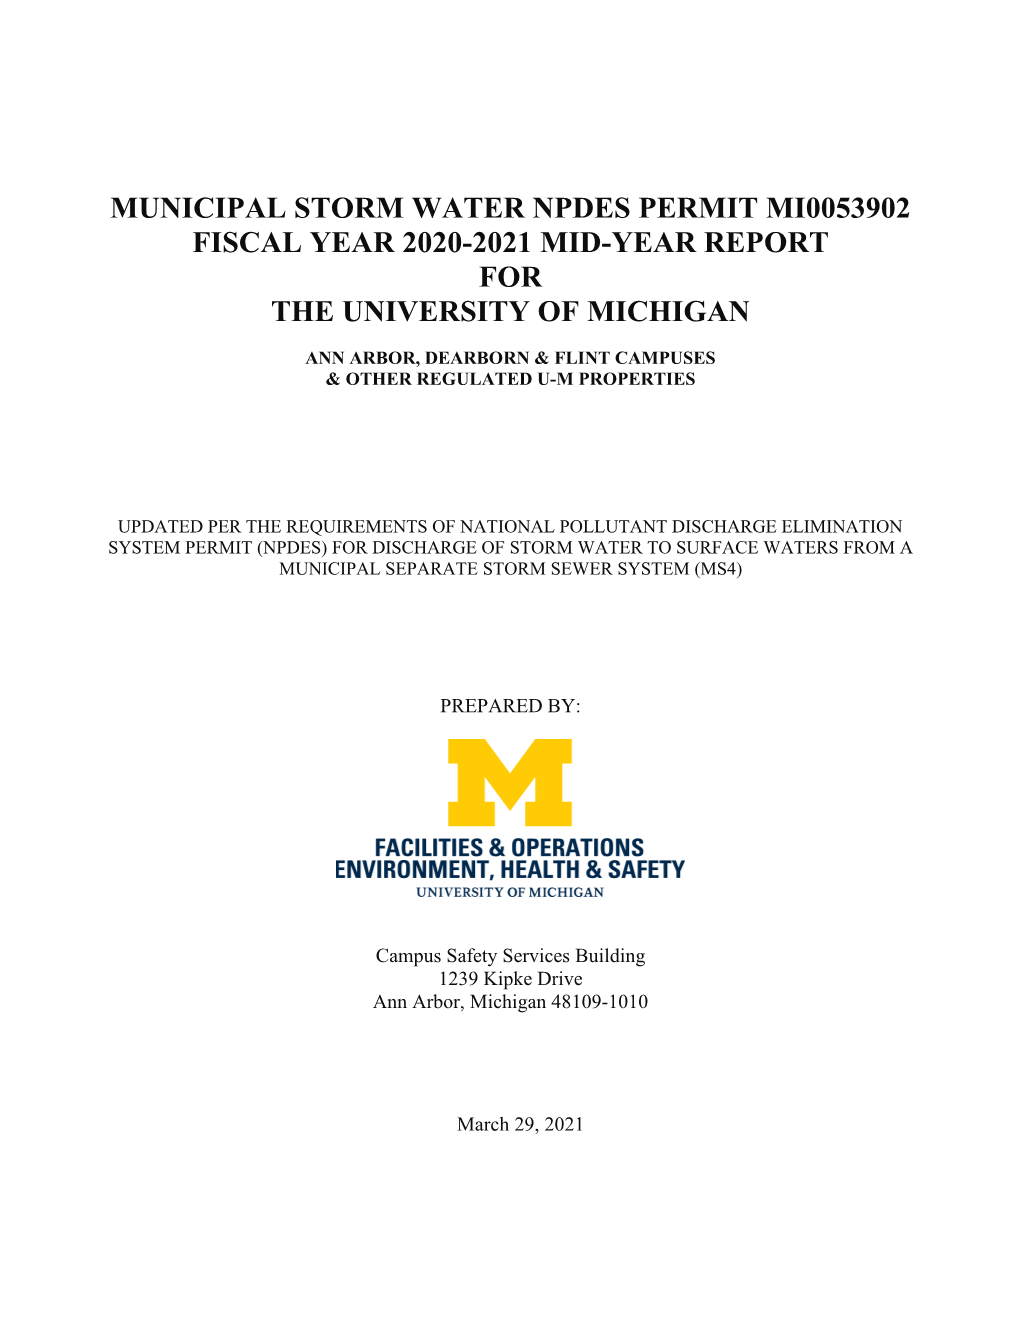 Municipal Storm Water Npdes Permit Mi0053902 Fiscal Year 2020-2021 Mid-Year Report for the University of Michigan